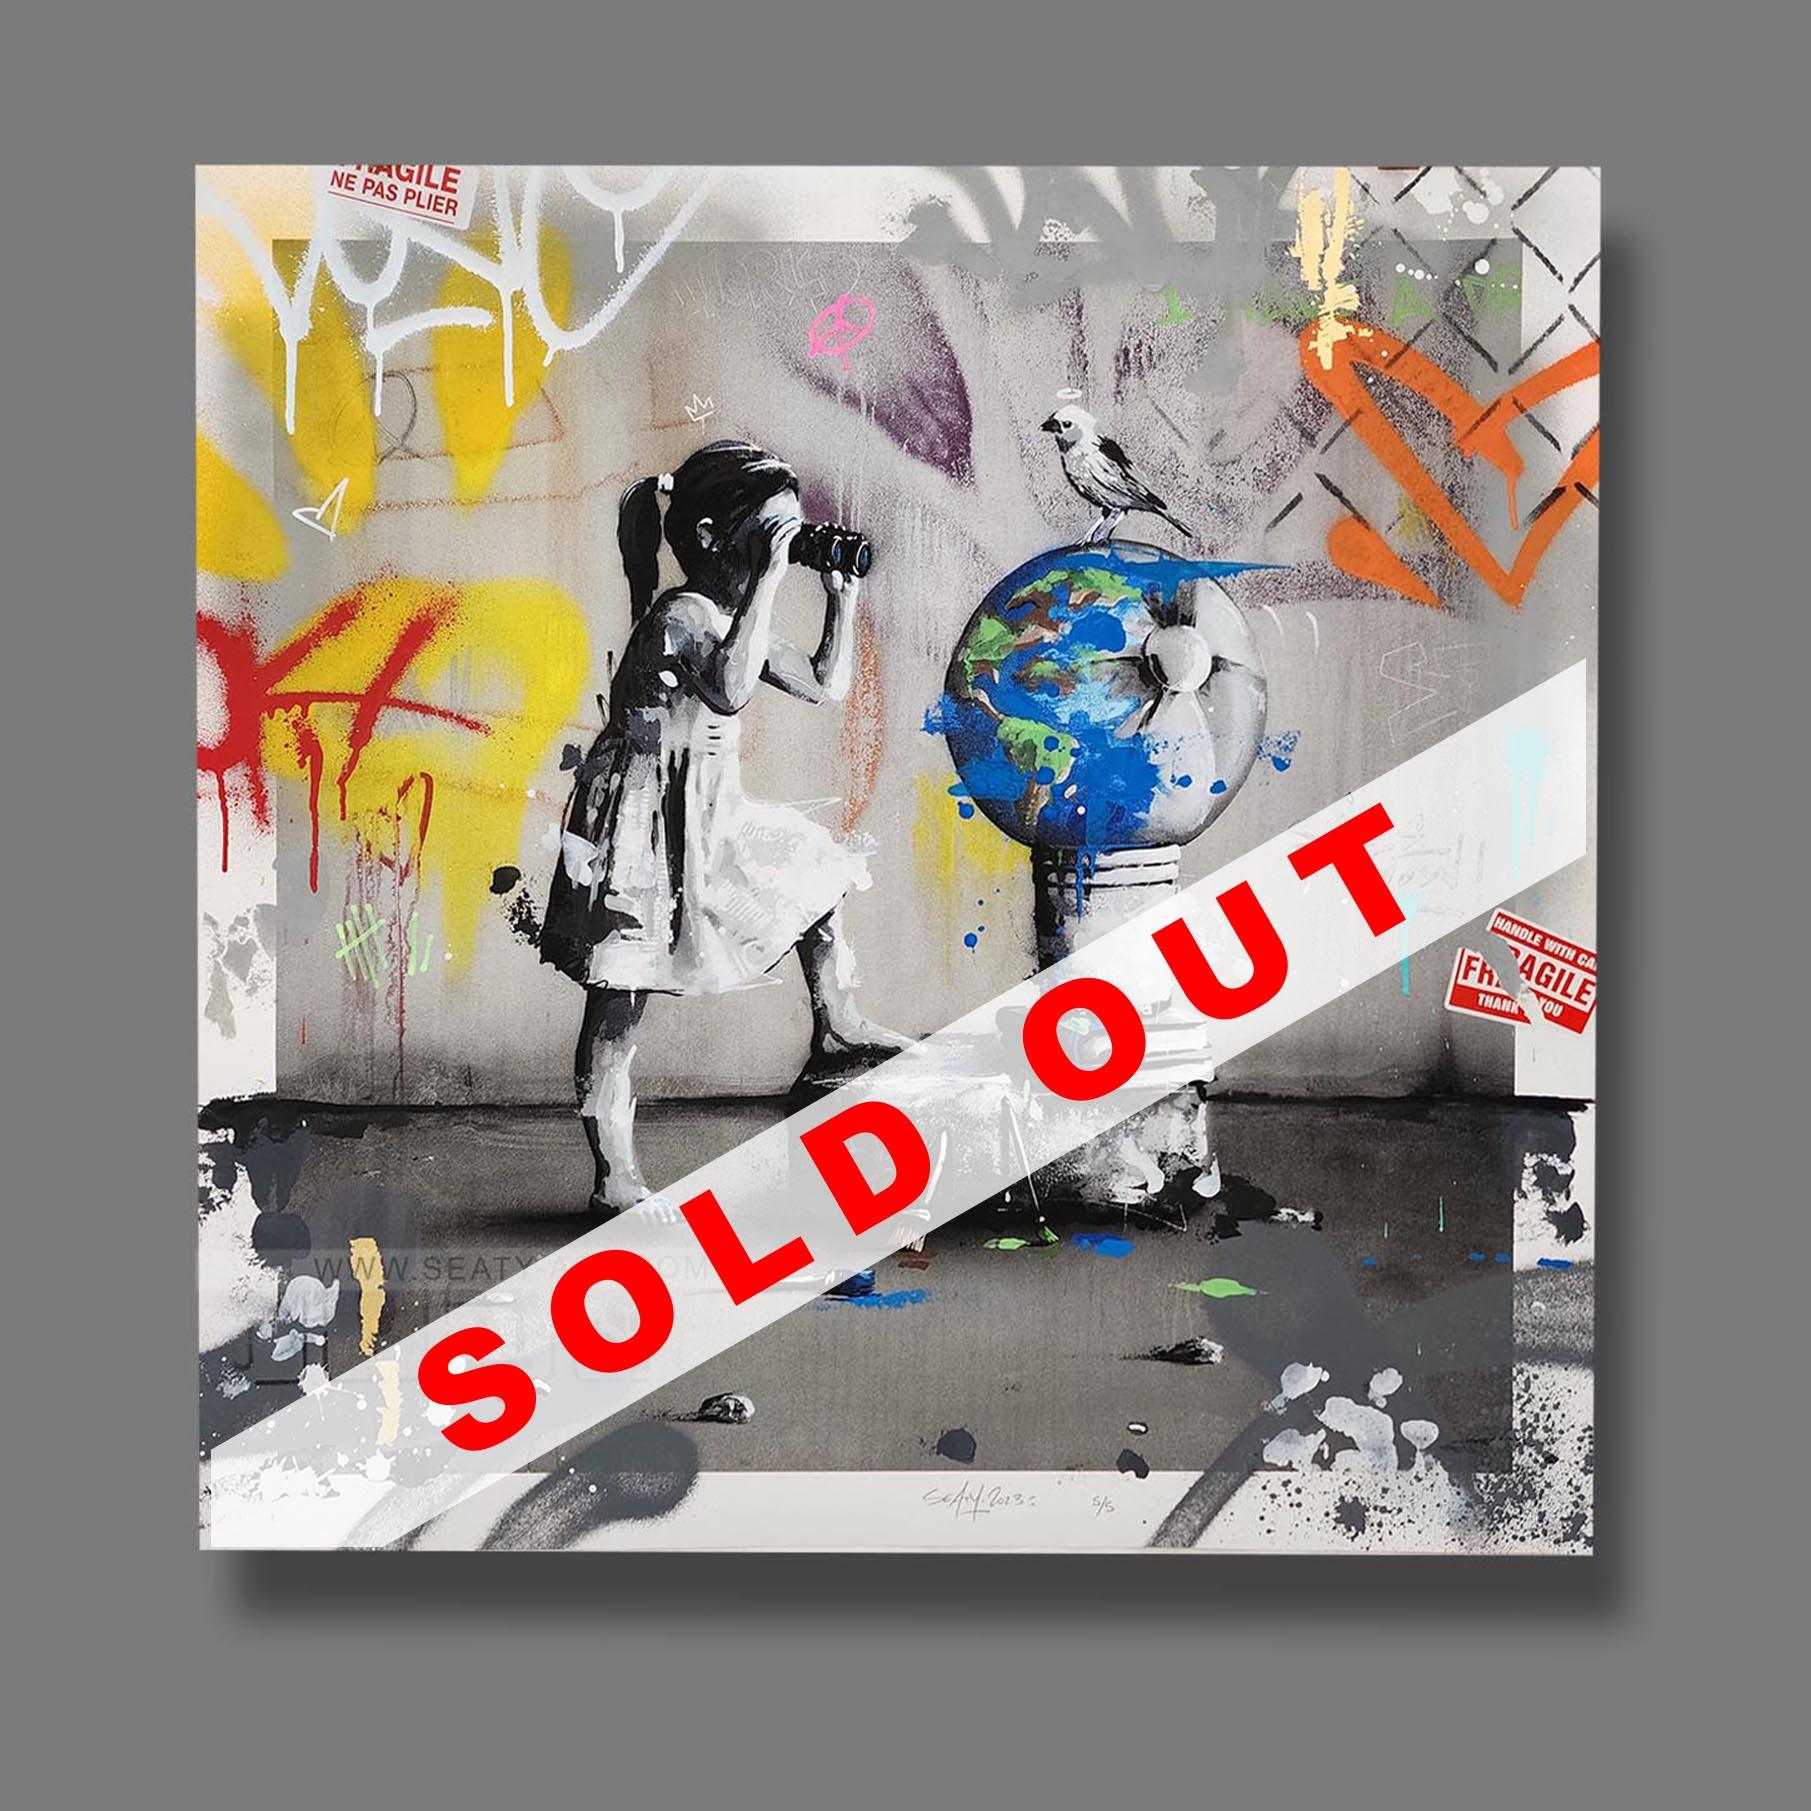 Sold out site 4